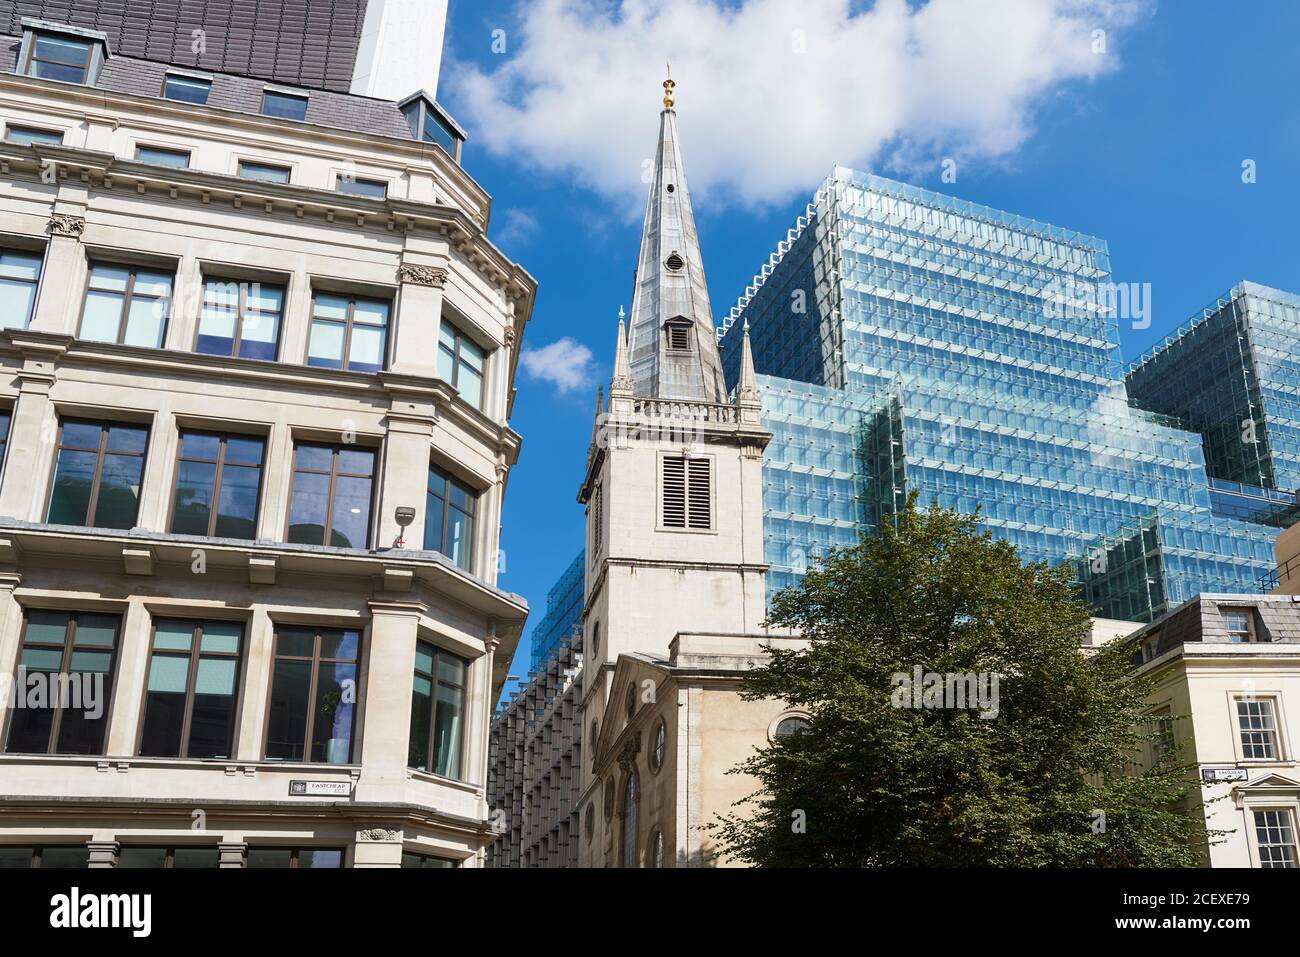 St Margaret Pattens church on Eastcheap in the City of London, UK Stock Photo